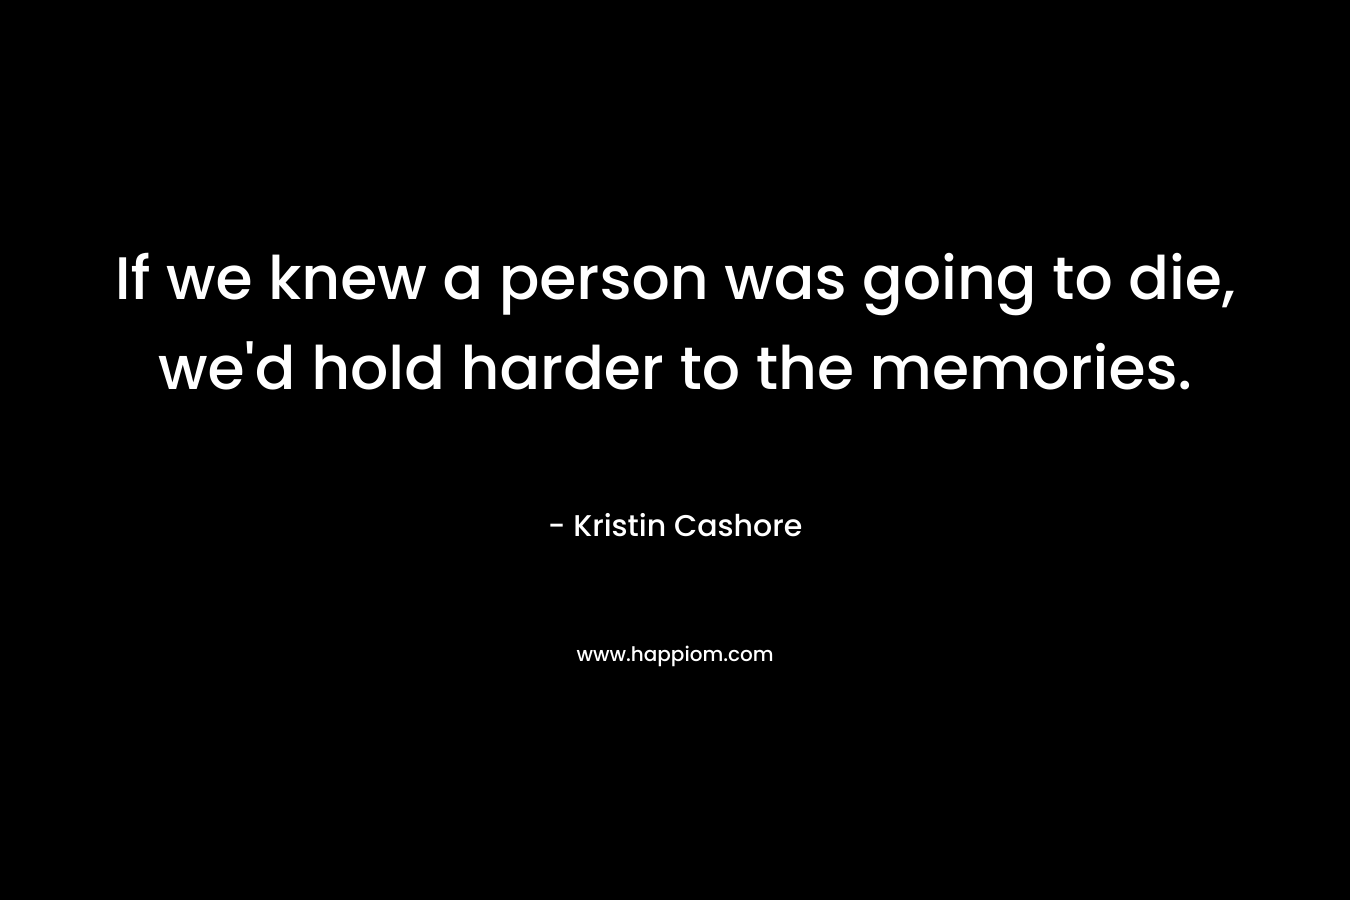 If we knew a person was going to die, we’d hold harder to the memories. – Kristin Cashore